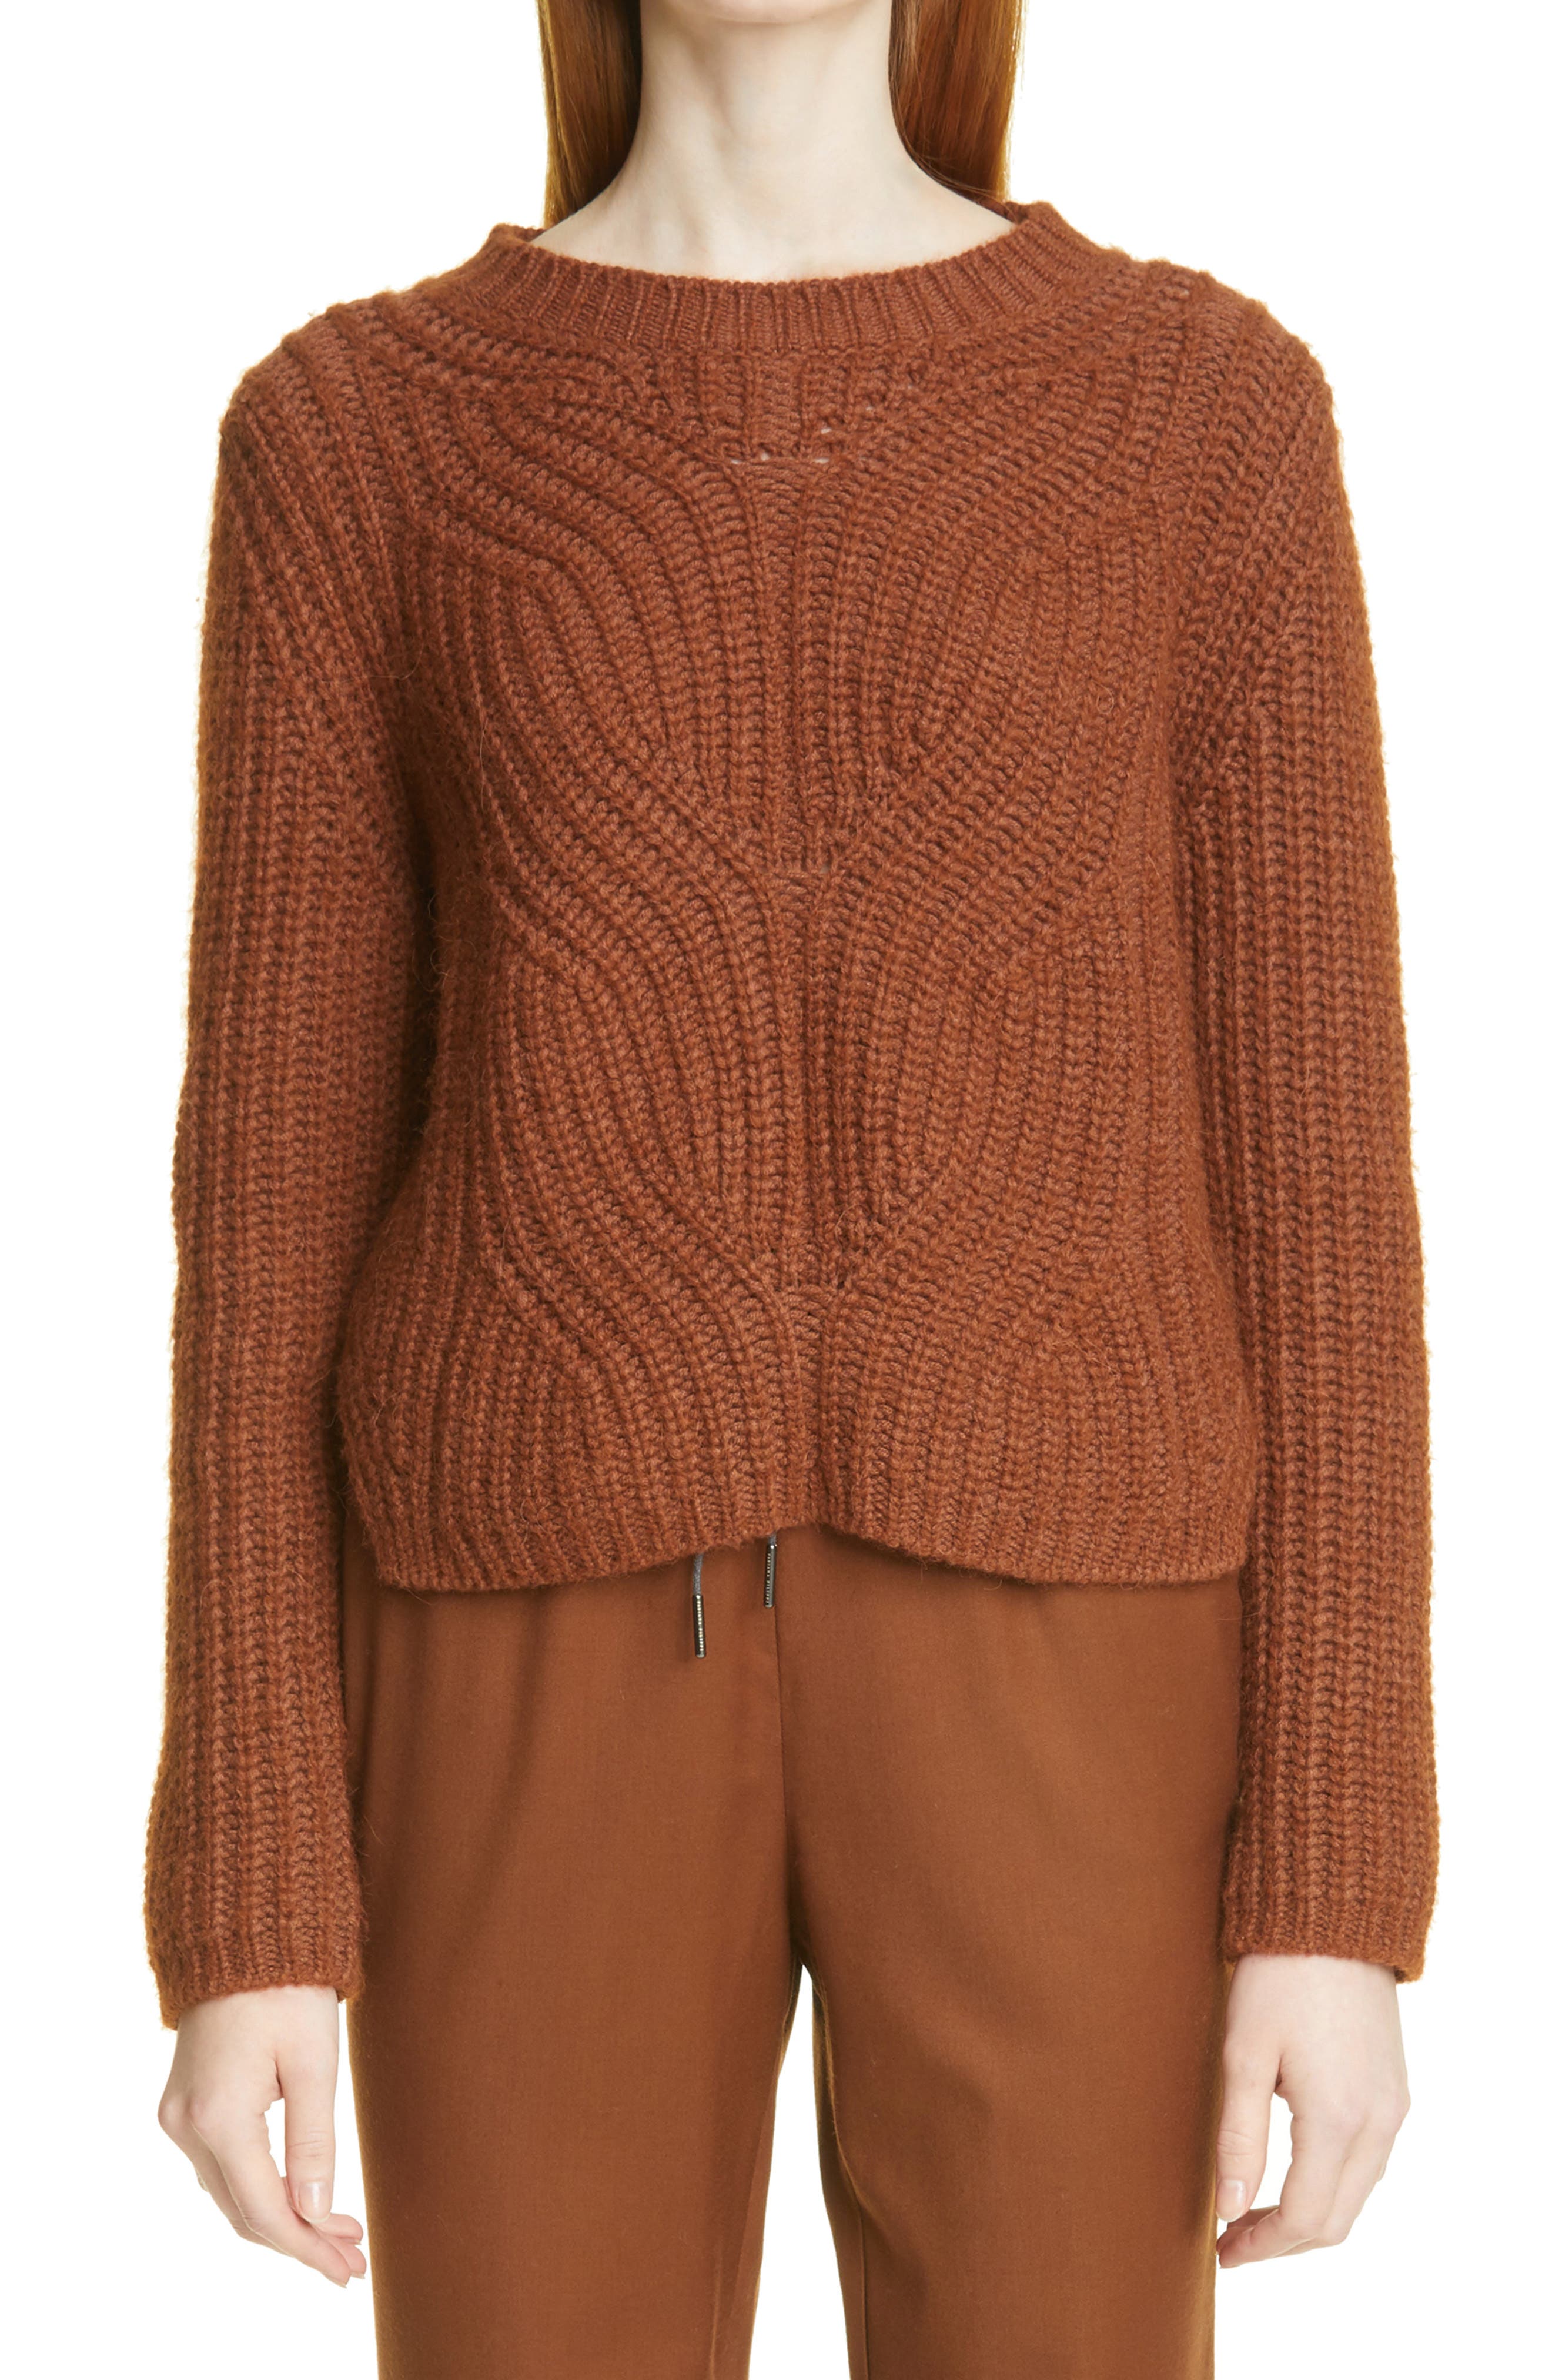 Fabiana Filippi Linen Cardigan in Camel Womens Clothing Jumpers and knitwear Cardigans Natural 